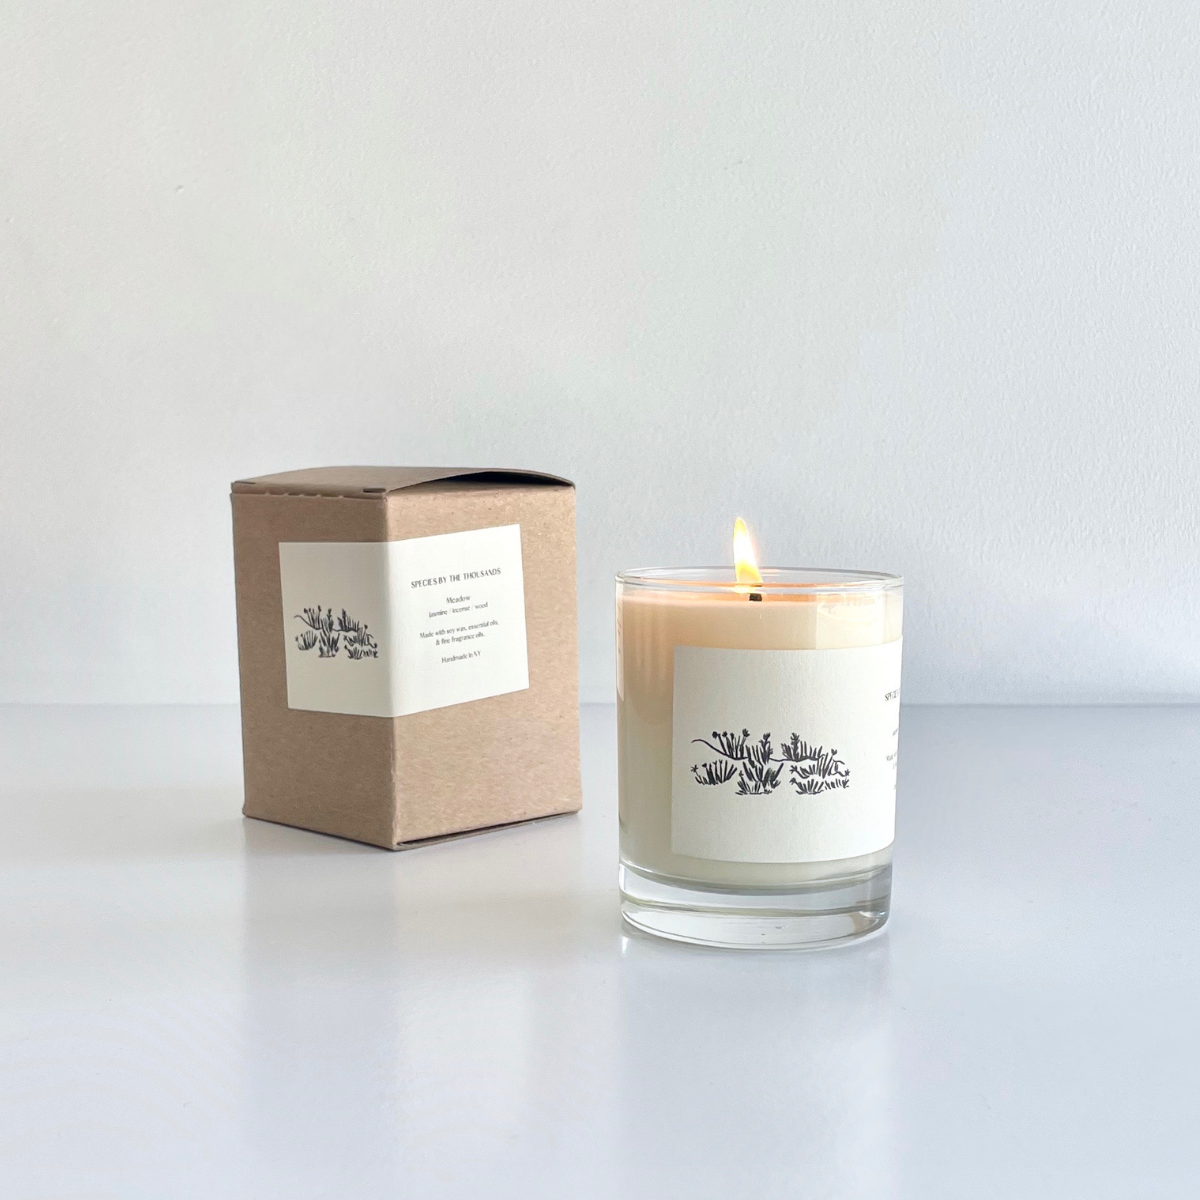 Meadow - Jasmine, Incense, and Wood Soy Candle